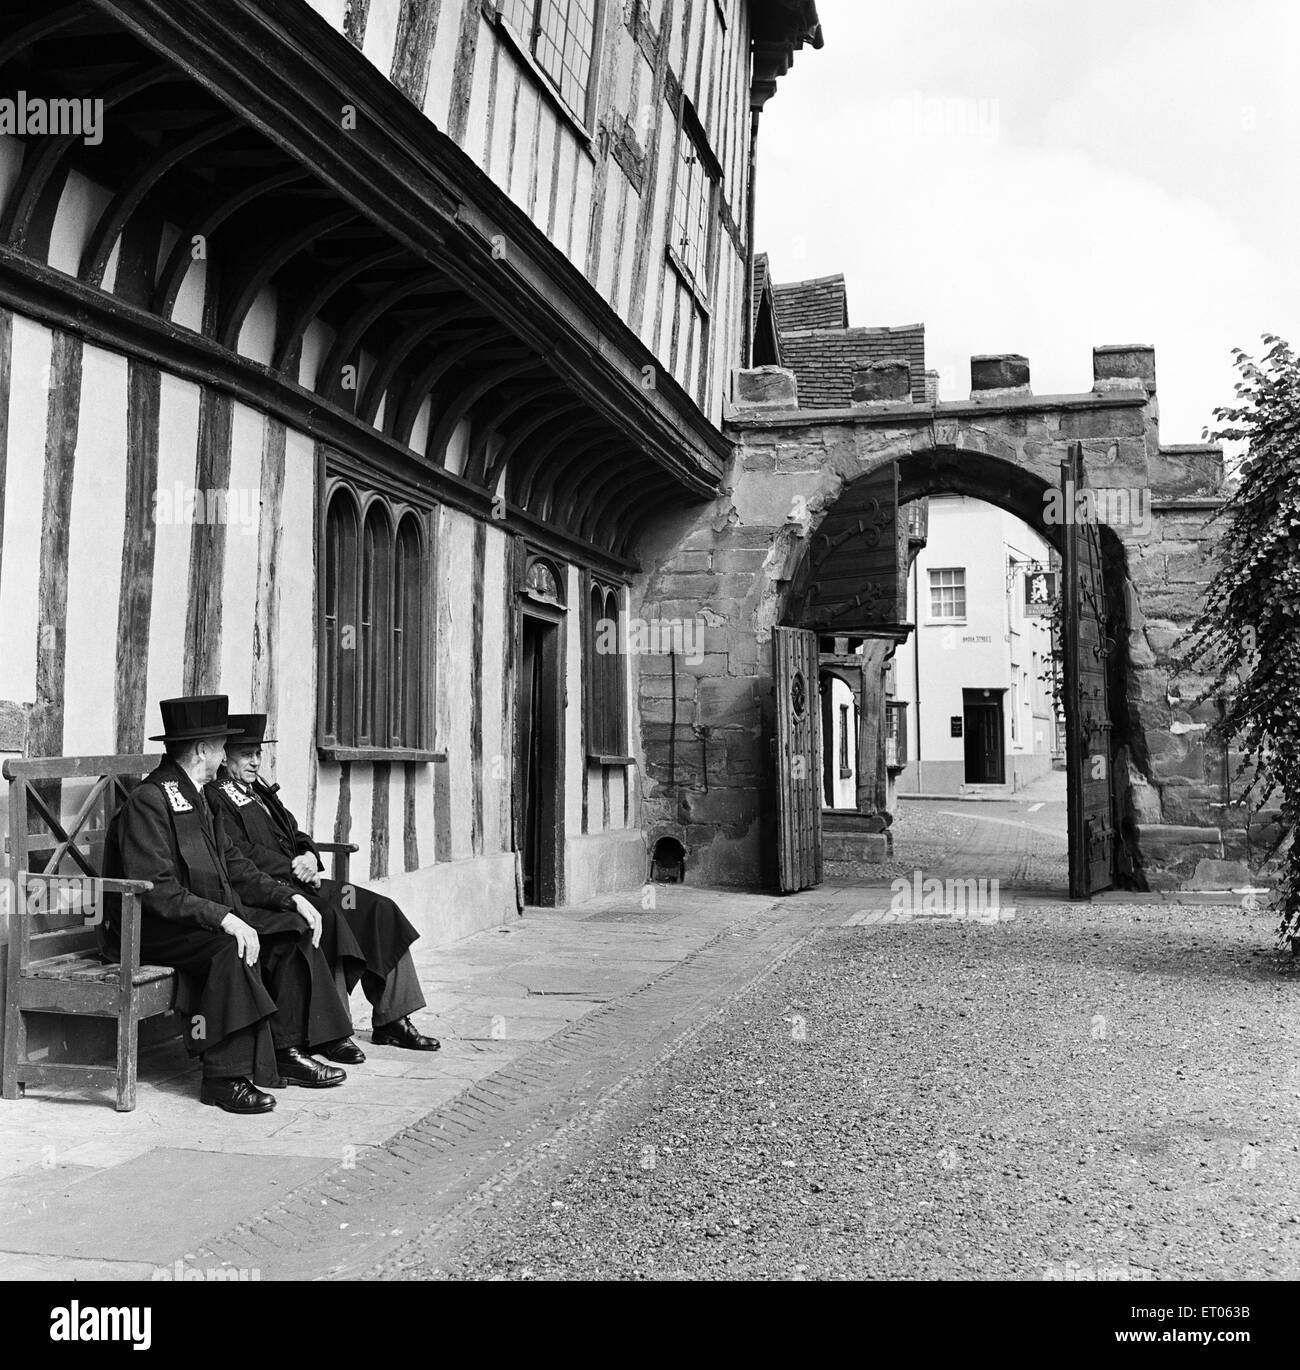 Lord Leycester Hospital, a delightful and historic group of 14th century timber-framed buildings, which is a retirement home for ex-Servicemen in Warwick, Warwickshire. October 1952. Stock Photo